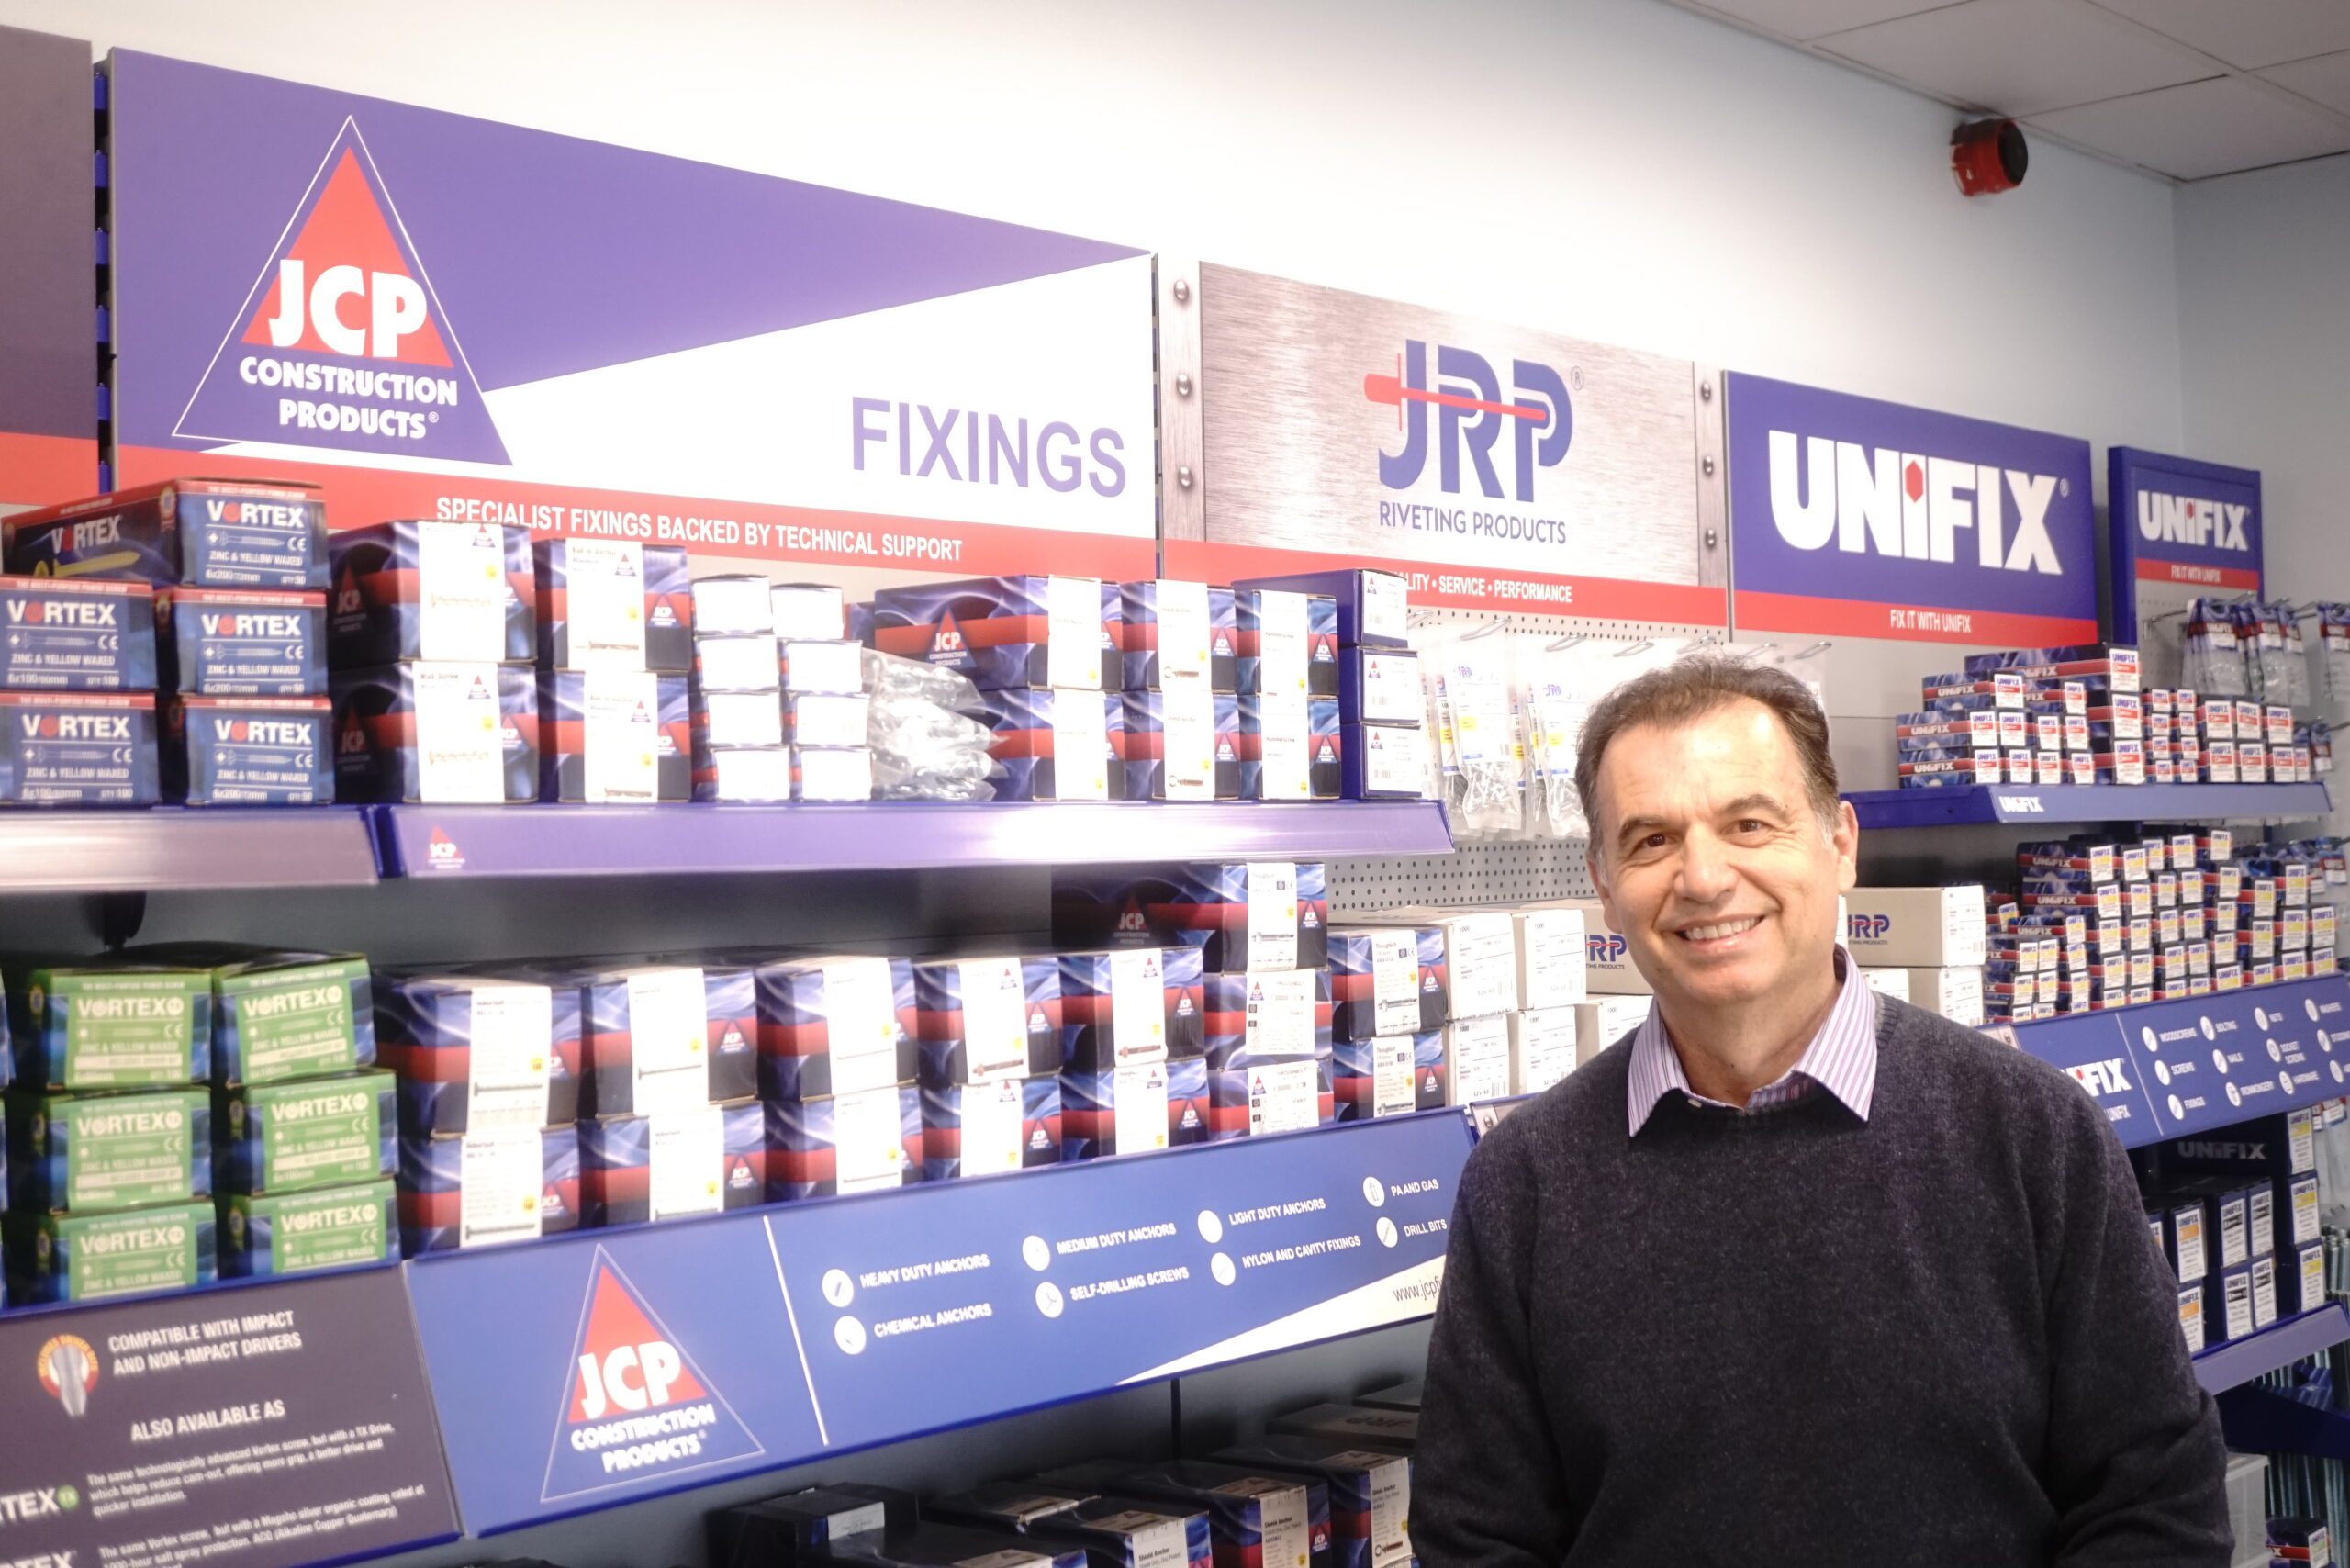 Vyron in front of JCP merchandising stand of products